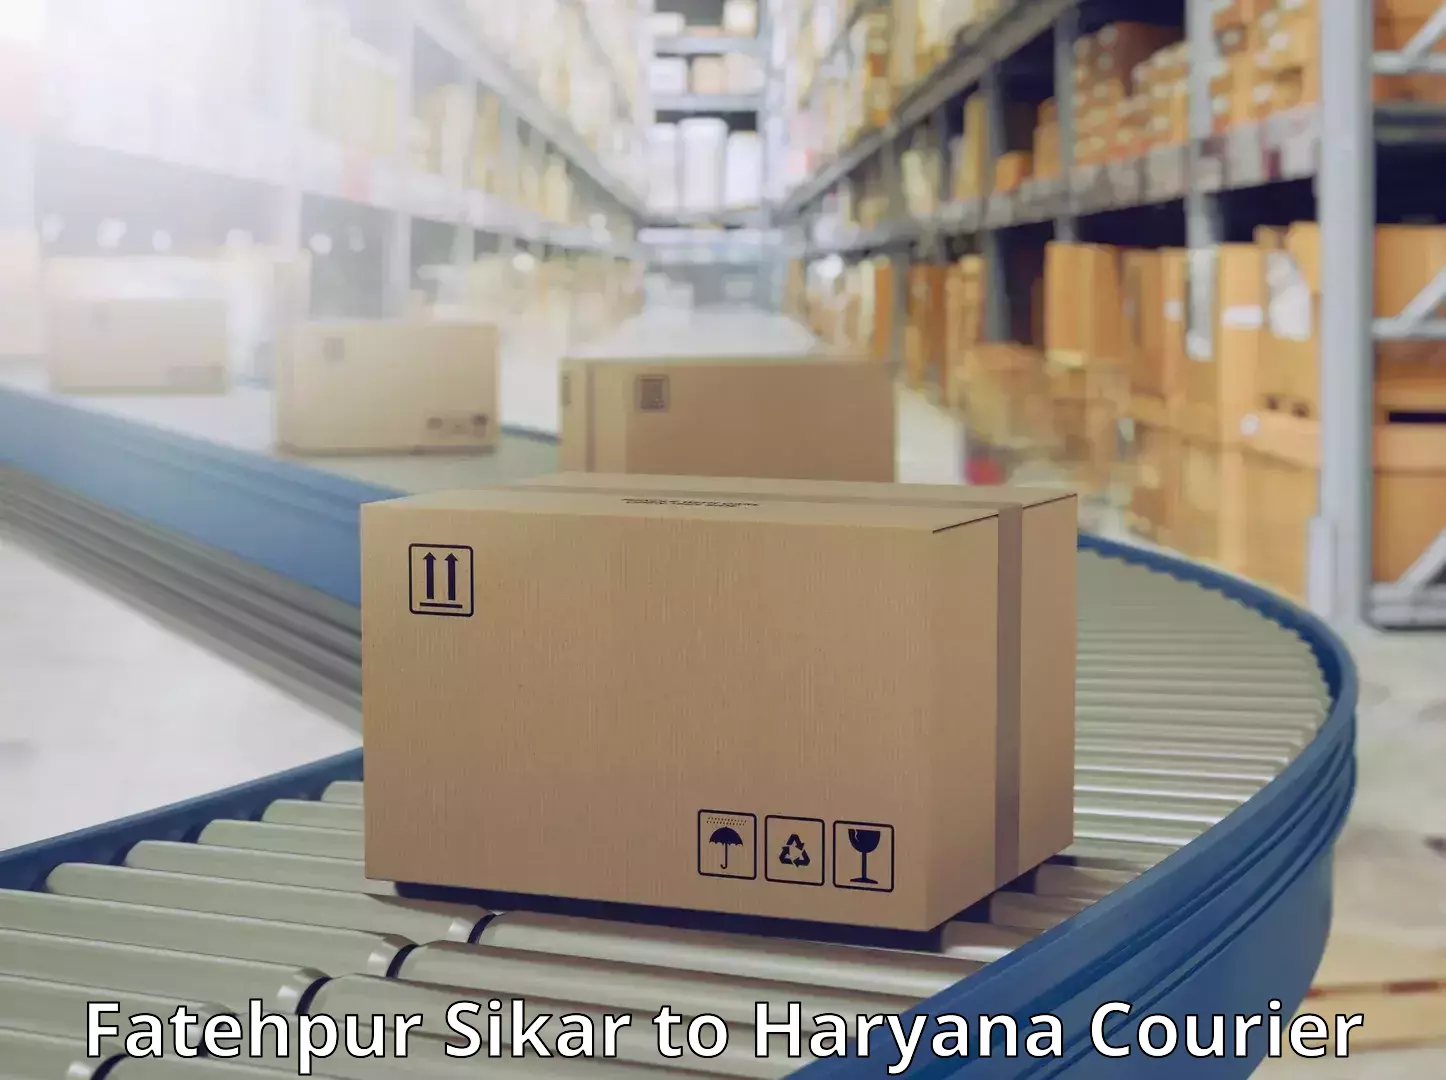 State-of-the-art courier technology Fatehpur Sikar to Mandi Dabwali